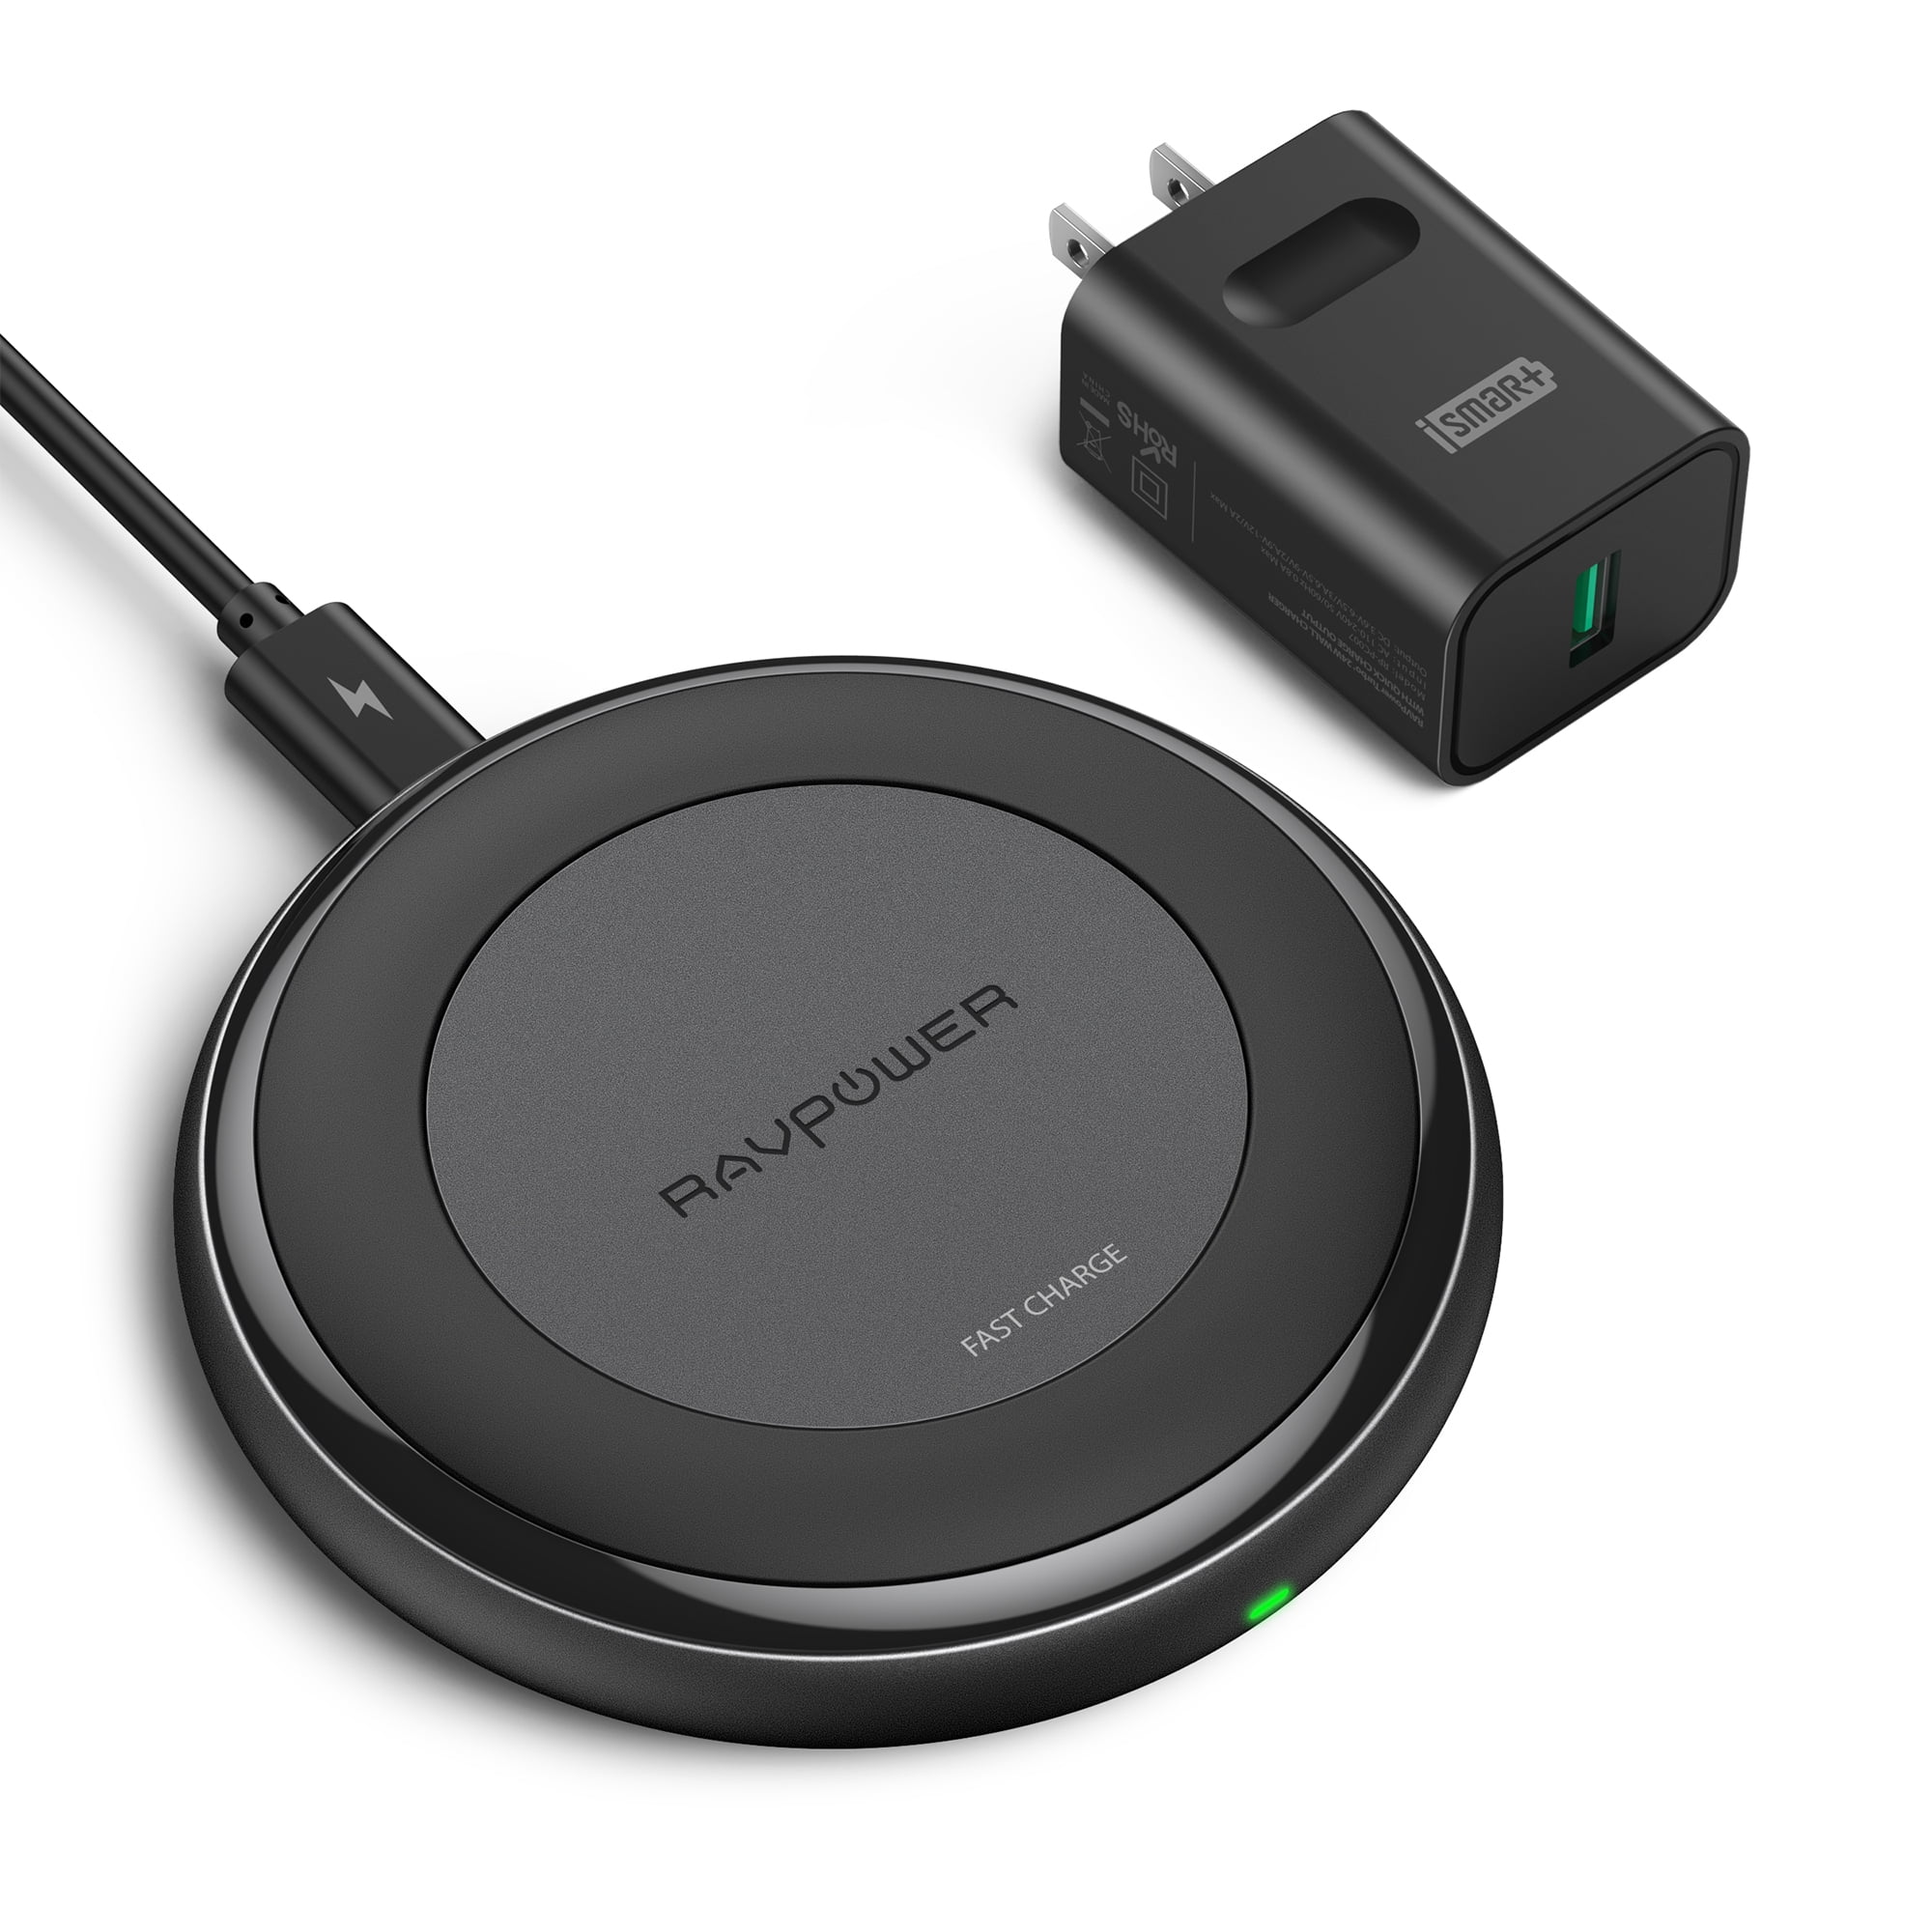 plastic Broek Hollywood RAVPower Wireless Charger, 10W Max Fast Charge Wireless Charging Pad with  QC 3.0 Adapter for iPhone Smartphone - Walmart.com